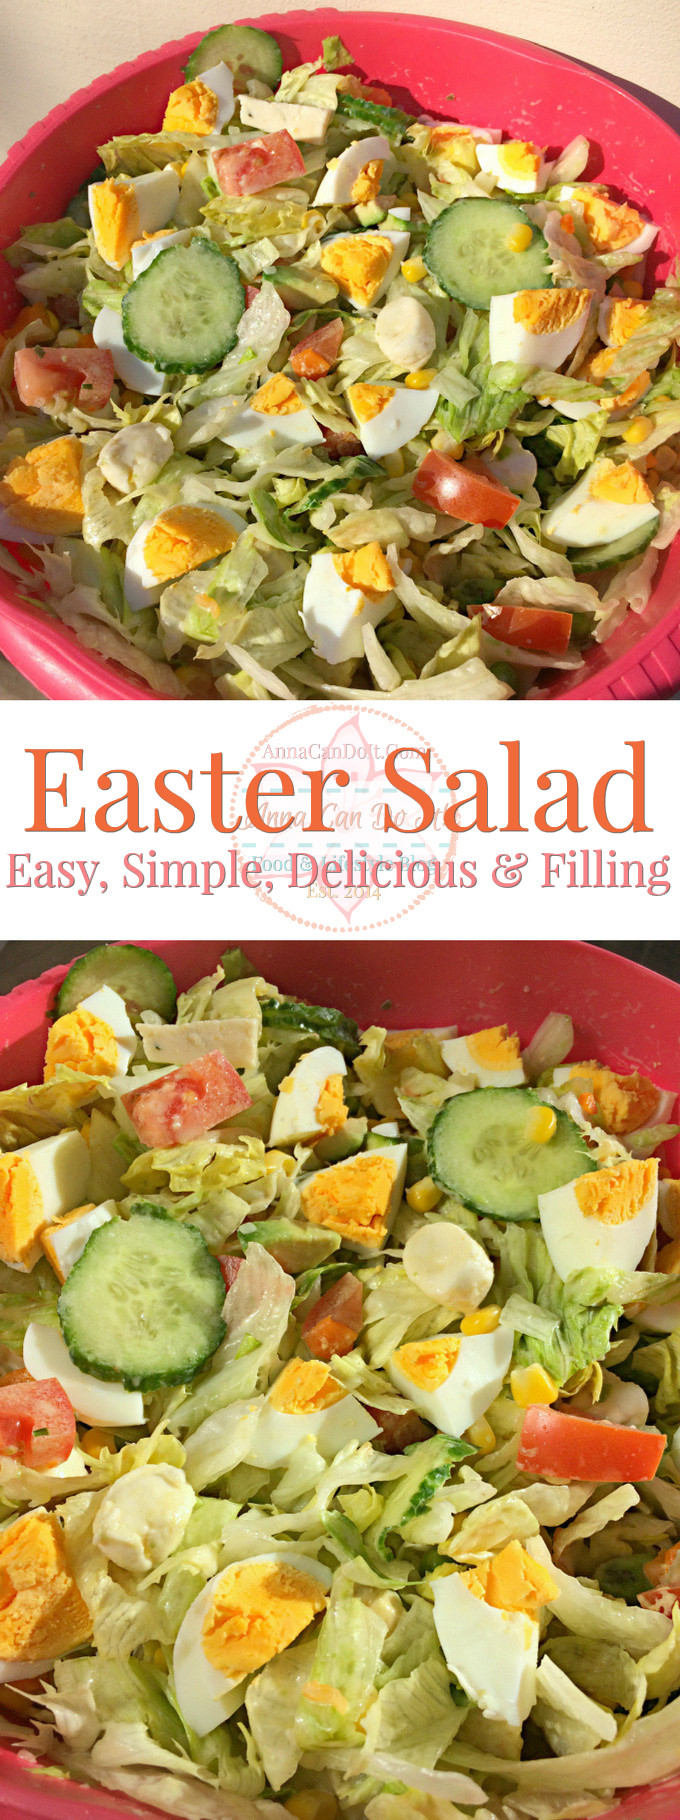 Easy Easter Salads
 Easter Salad Easy Simple Delicious & Filling